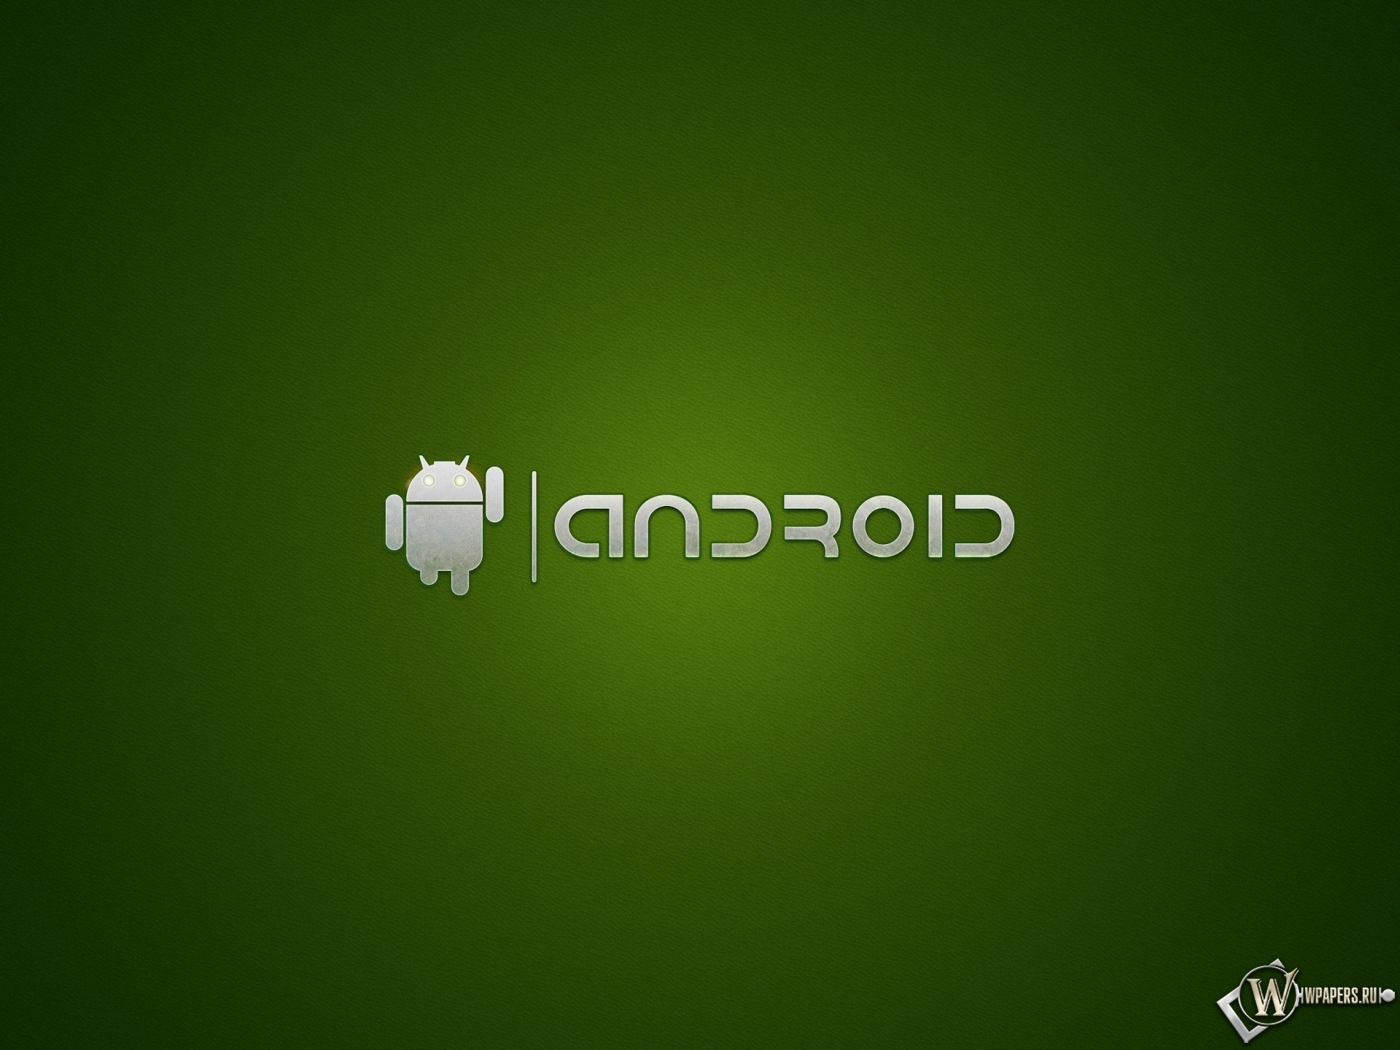 Android 1400x1050